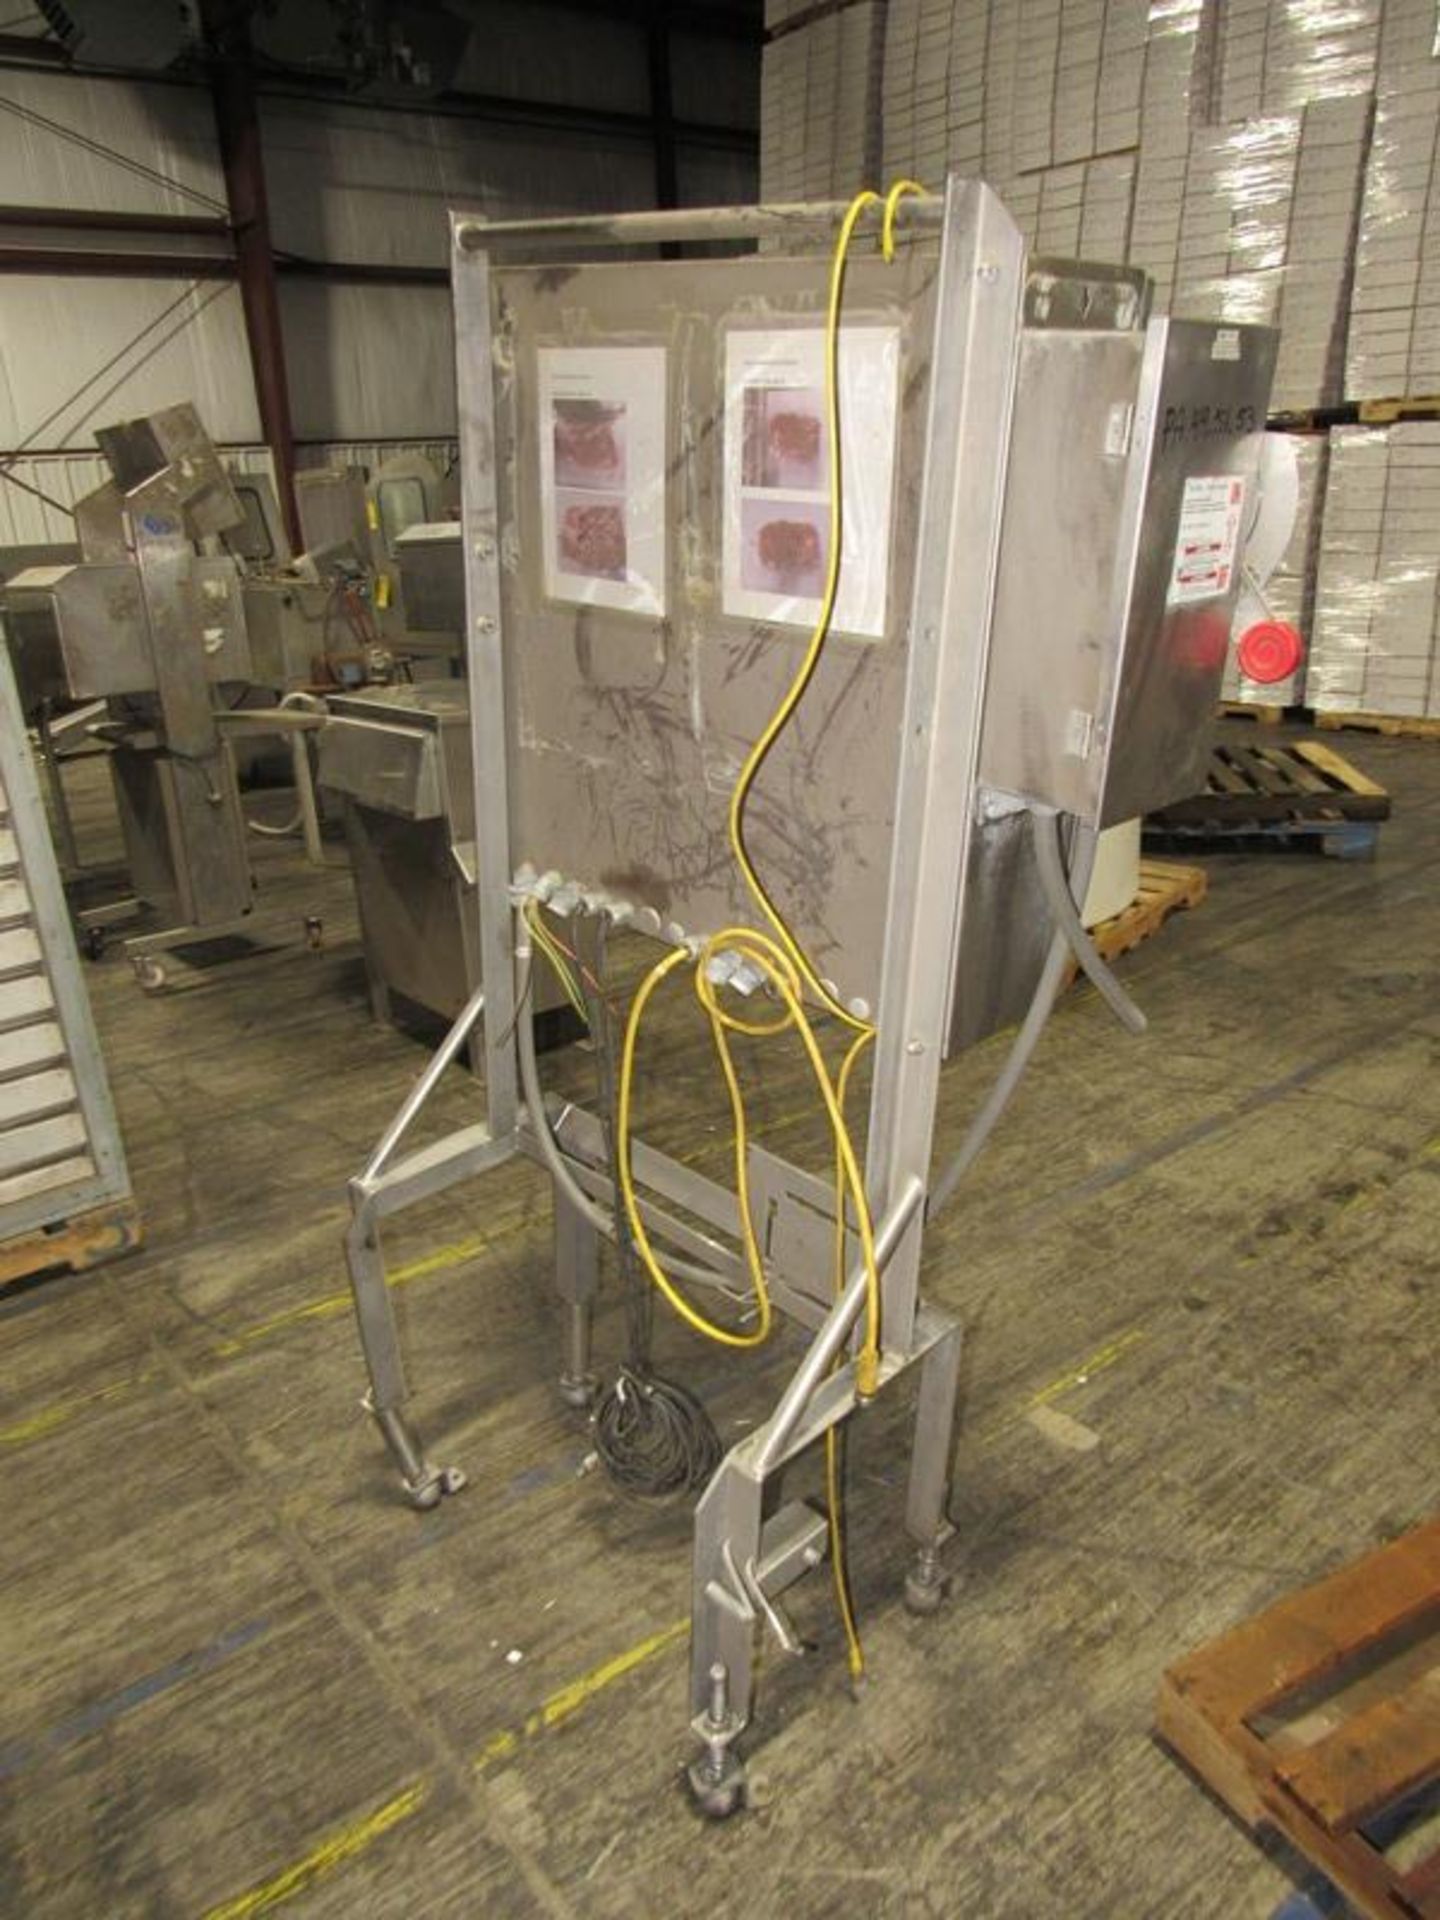 Stainless Steel Electrical Cabinet, 12" W X 6' tall, Allen-Bradley C-300 Readout (Loading Fee: $50. - Image 2 of 3